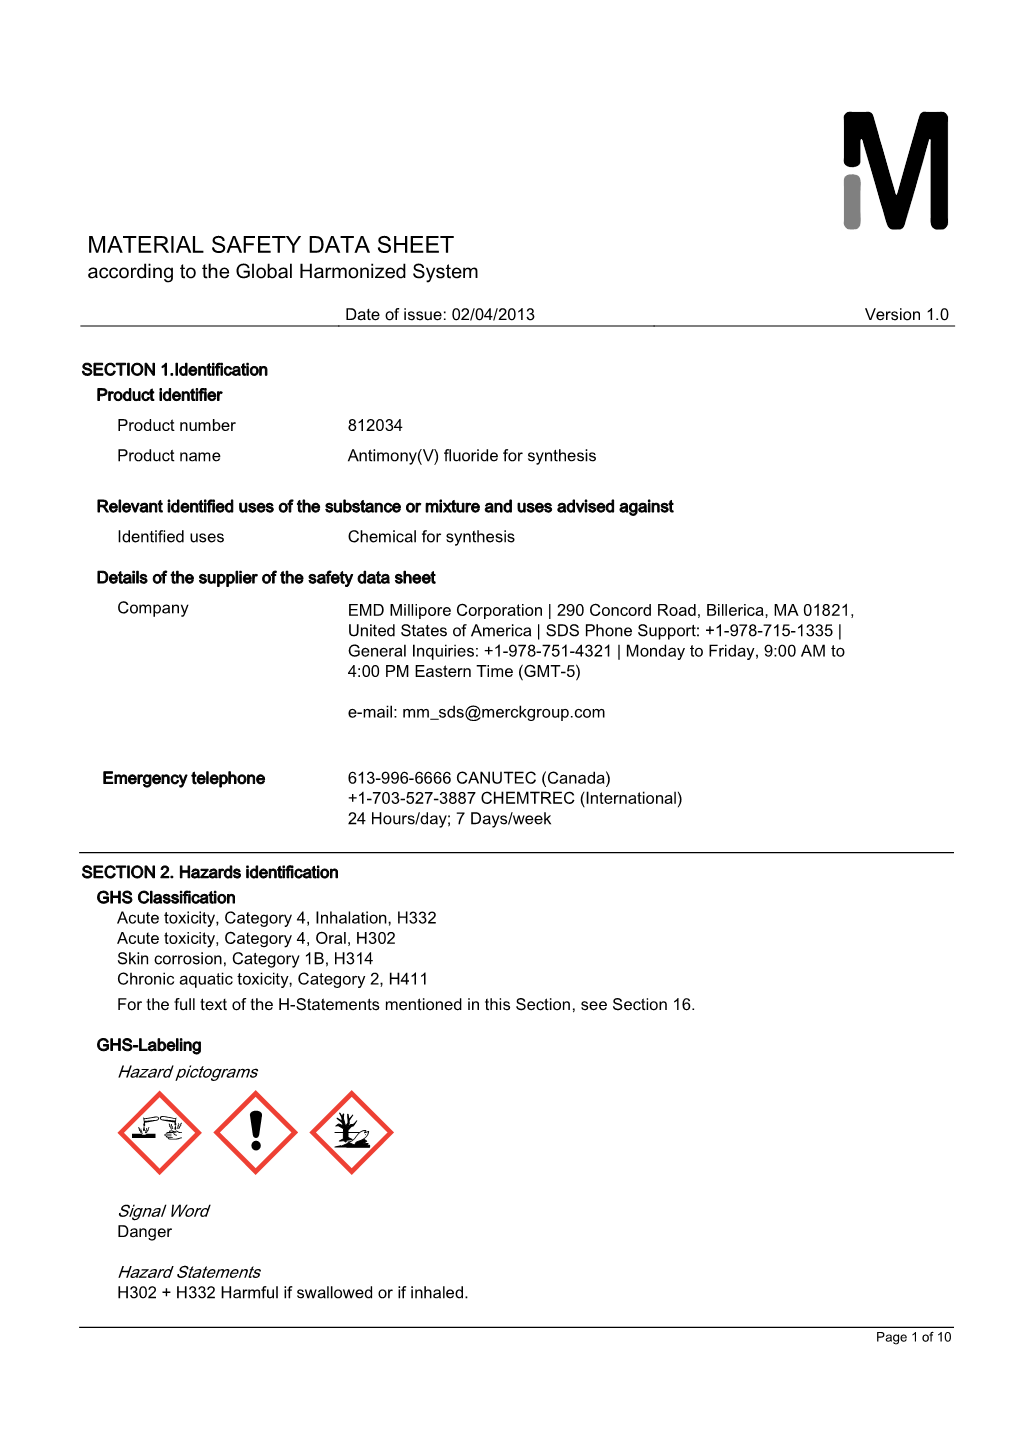 MATERIAL SAFETY DATA SHEET According to the Global Harmonized System